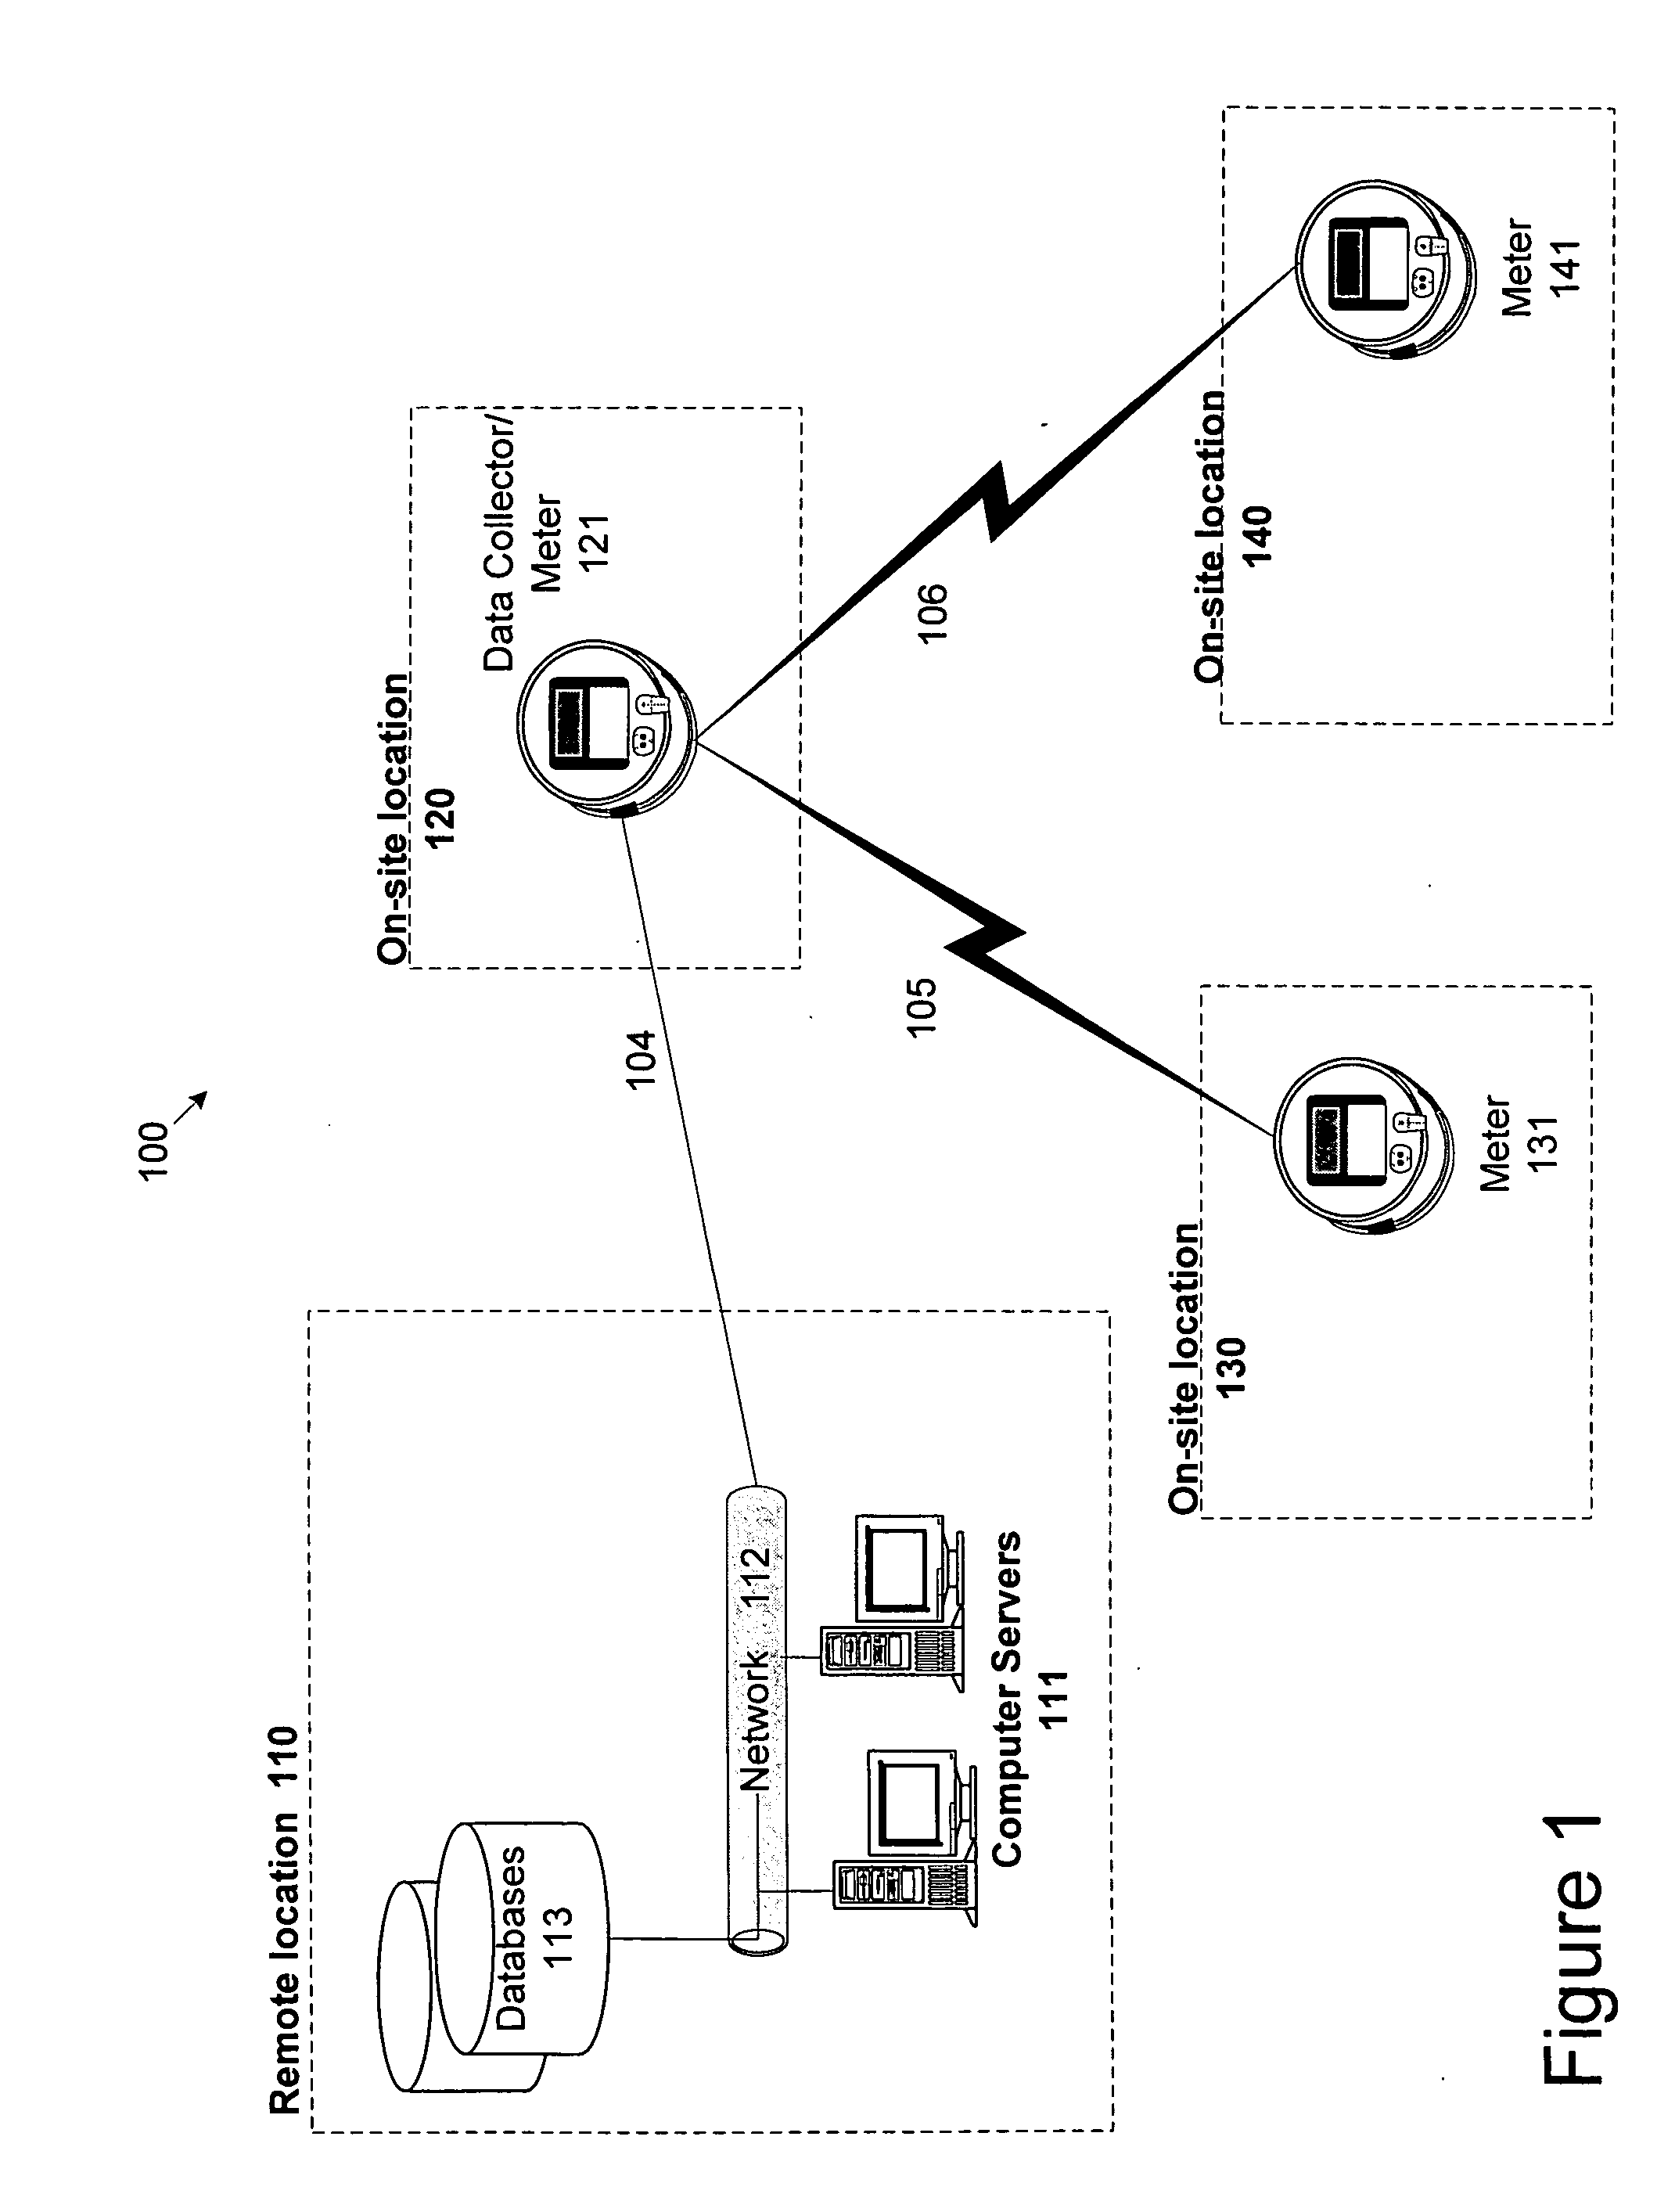 System and method for efficient configuration in a fixed network automated meter reading system